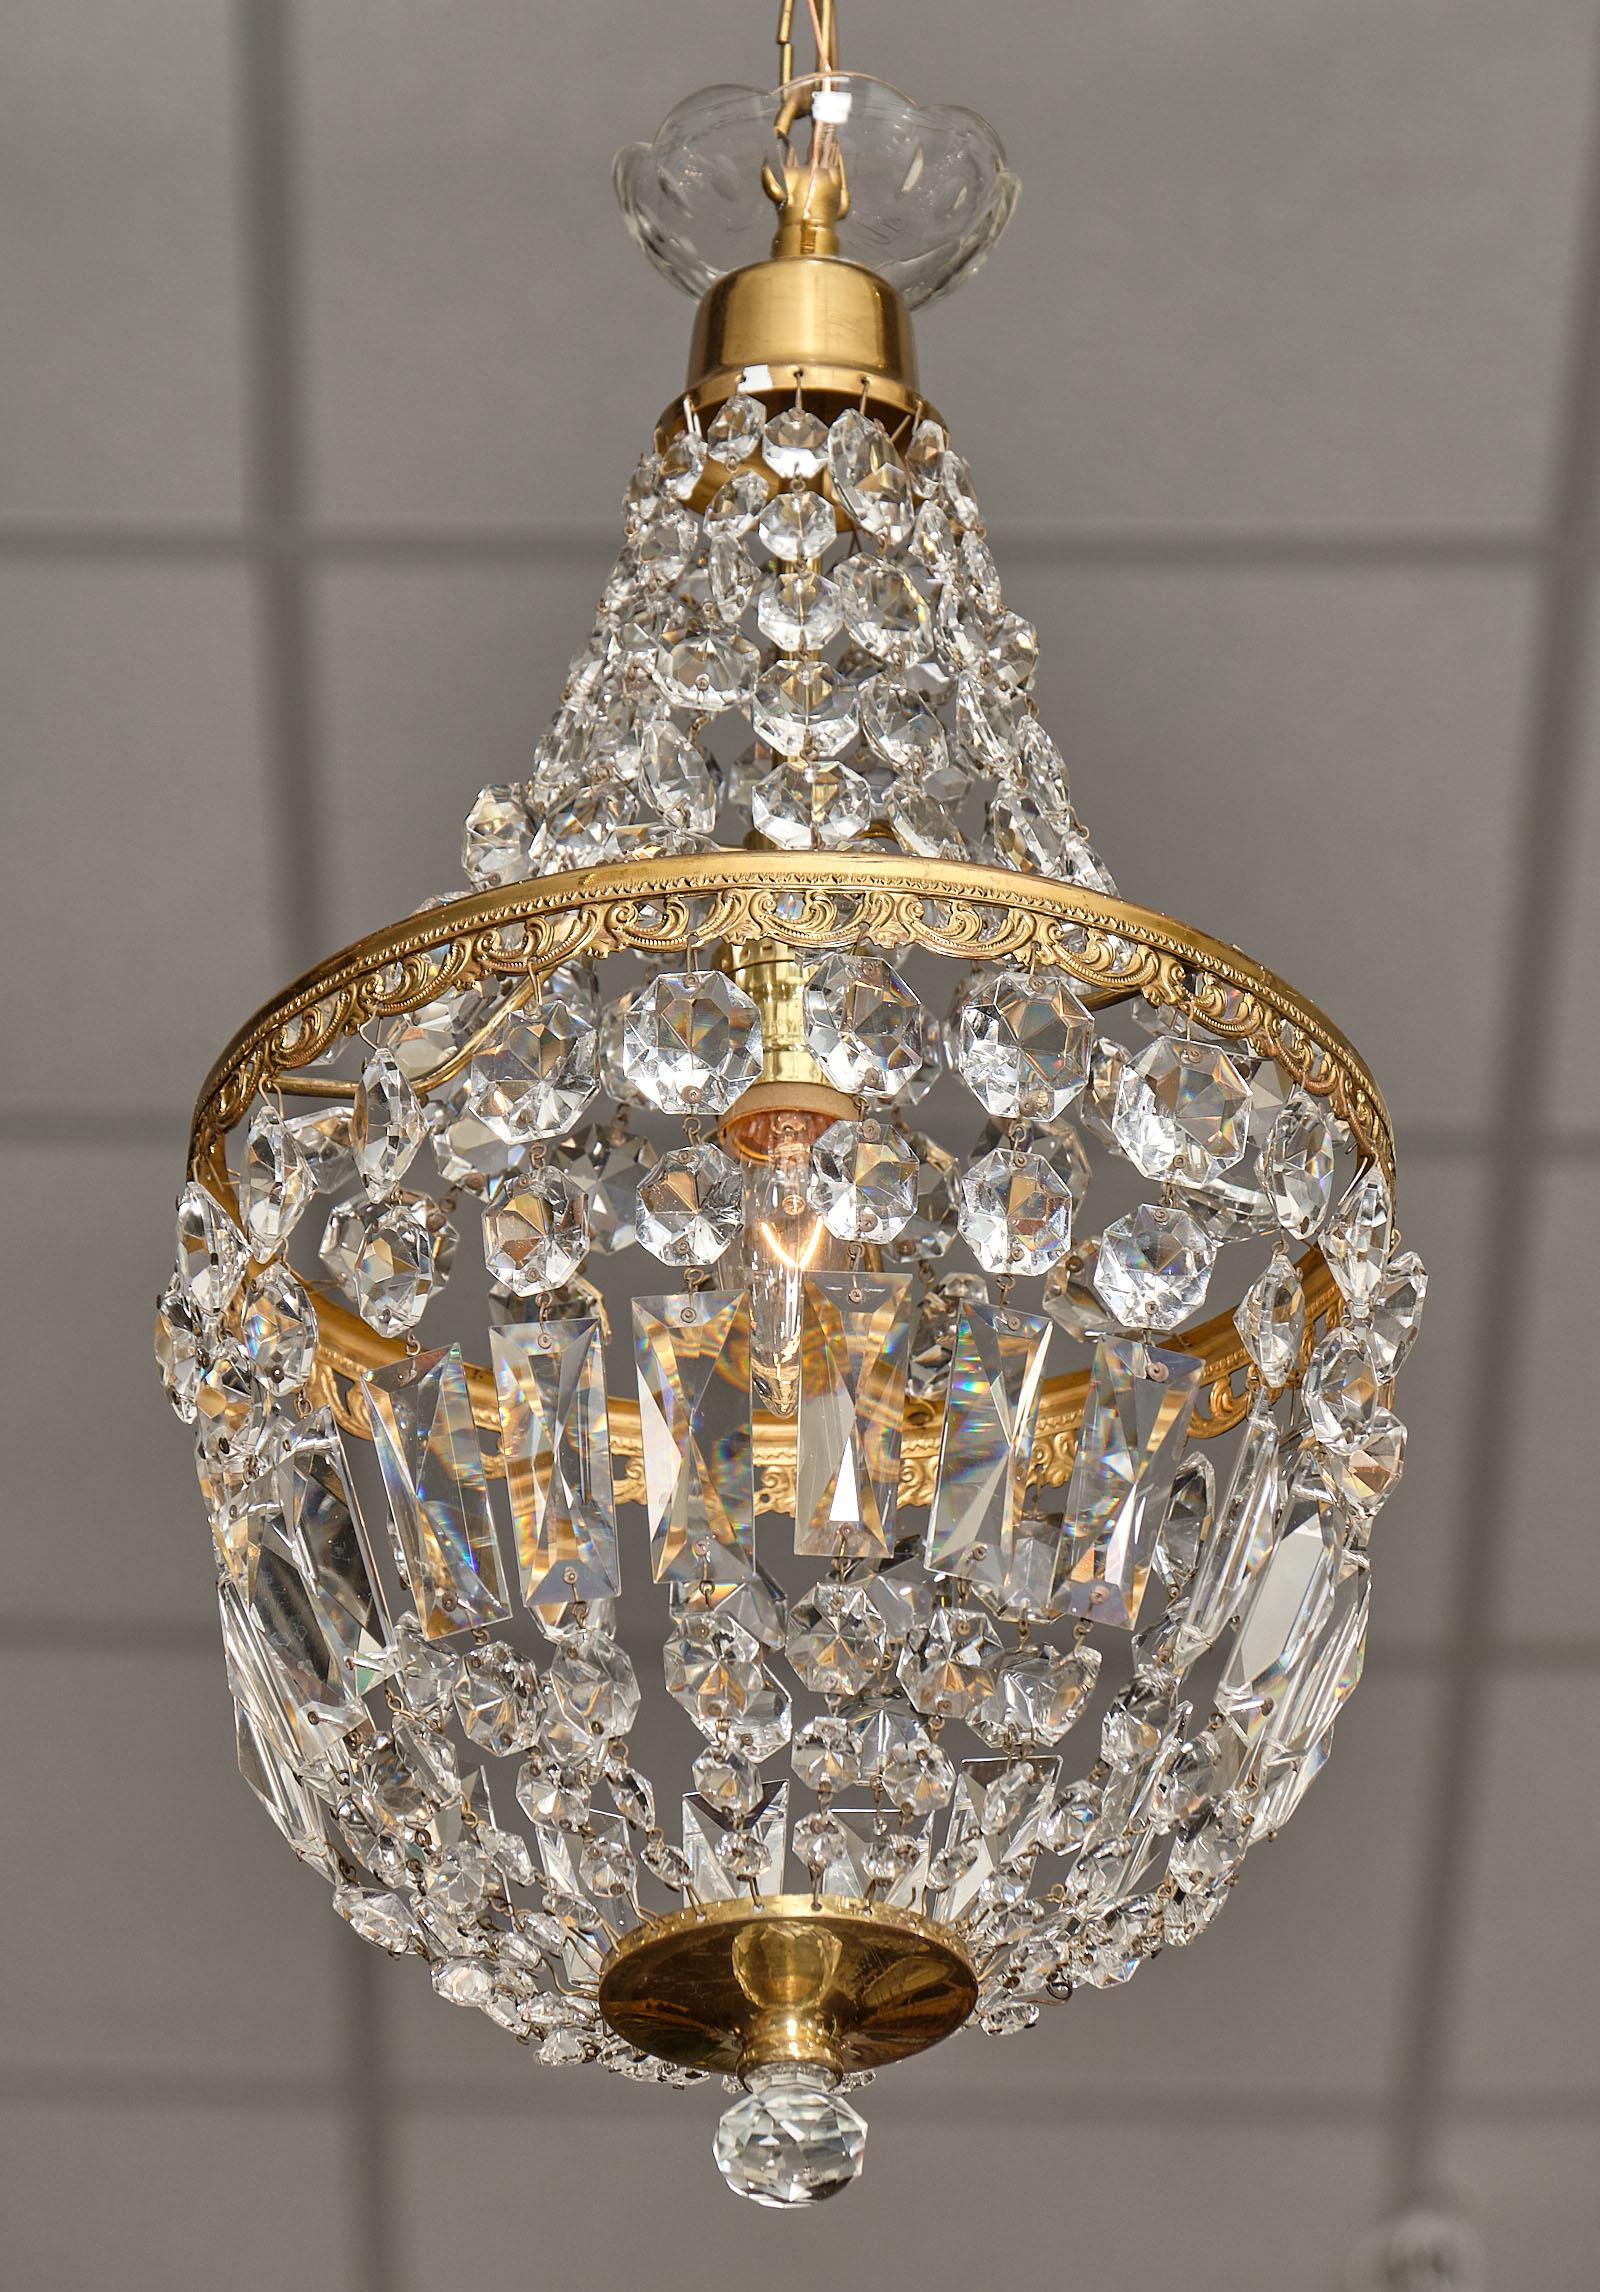 Pair of French antique crystal pendant chandeliers in the Empire style. Each fixture features an array of cut crystal connected with an embossed gilt brass crown. They have been newly wired to fit US standards. The current height from ceiling is 31